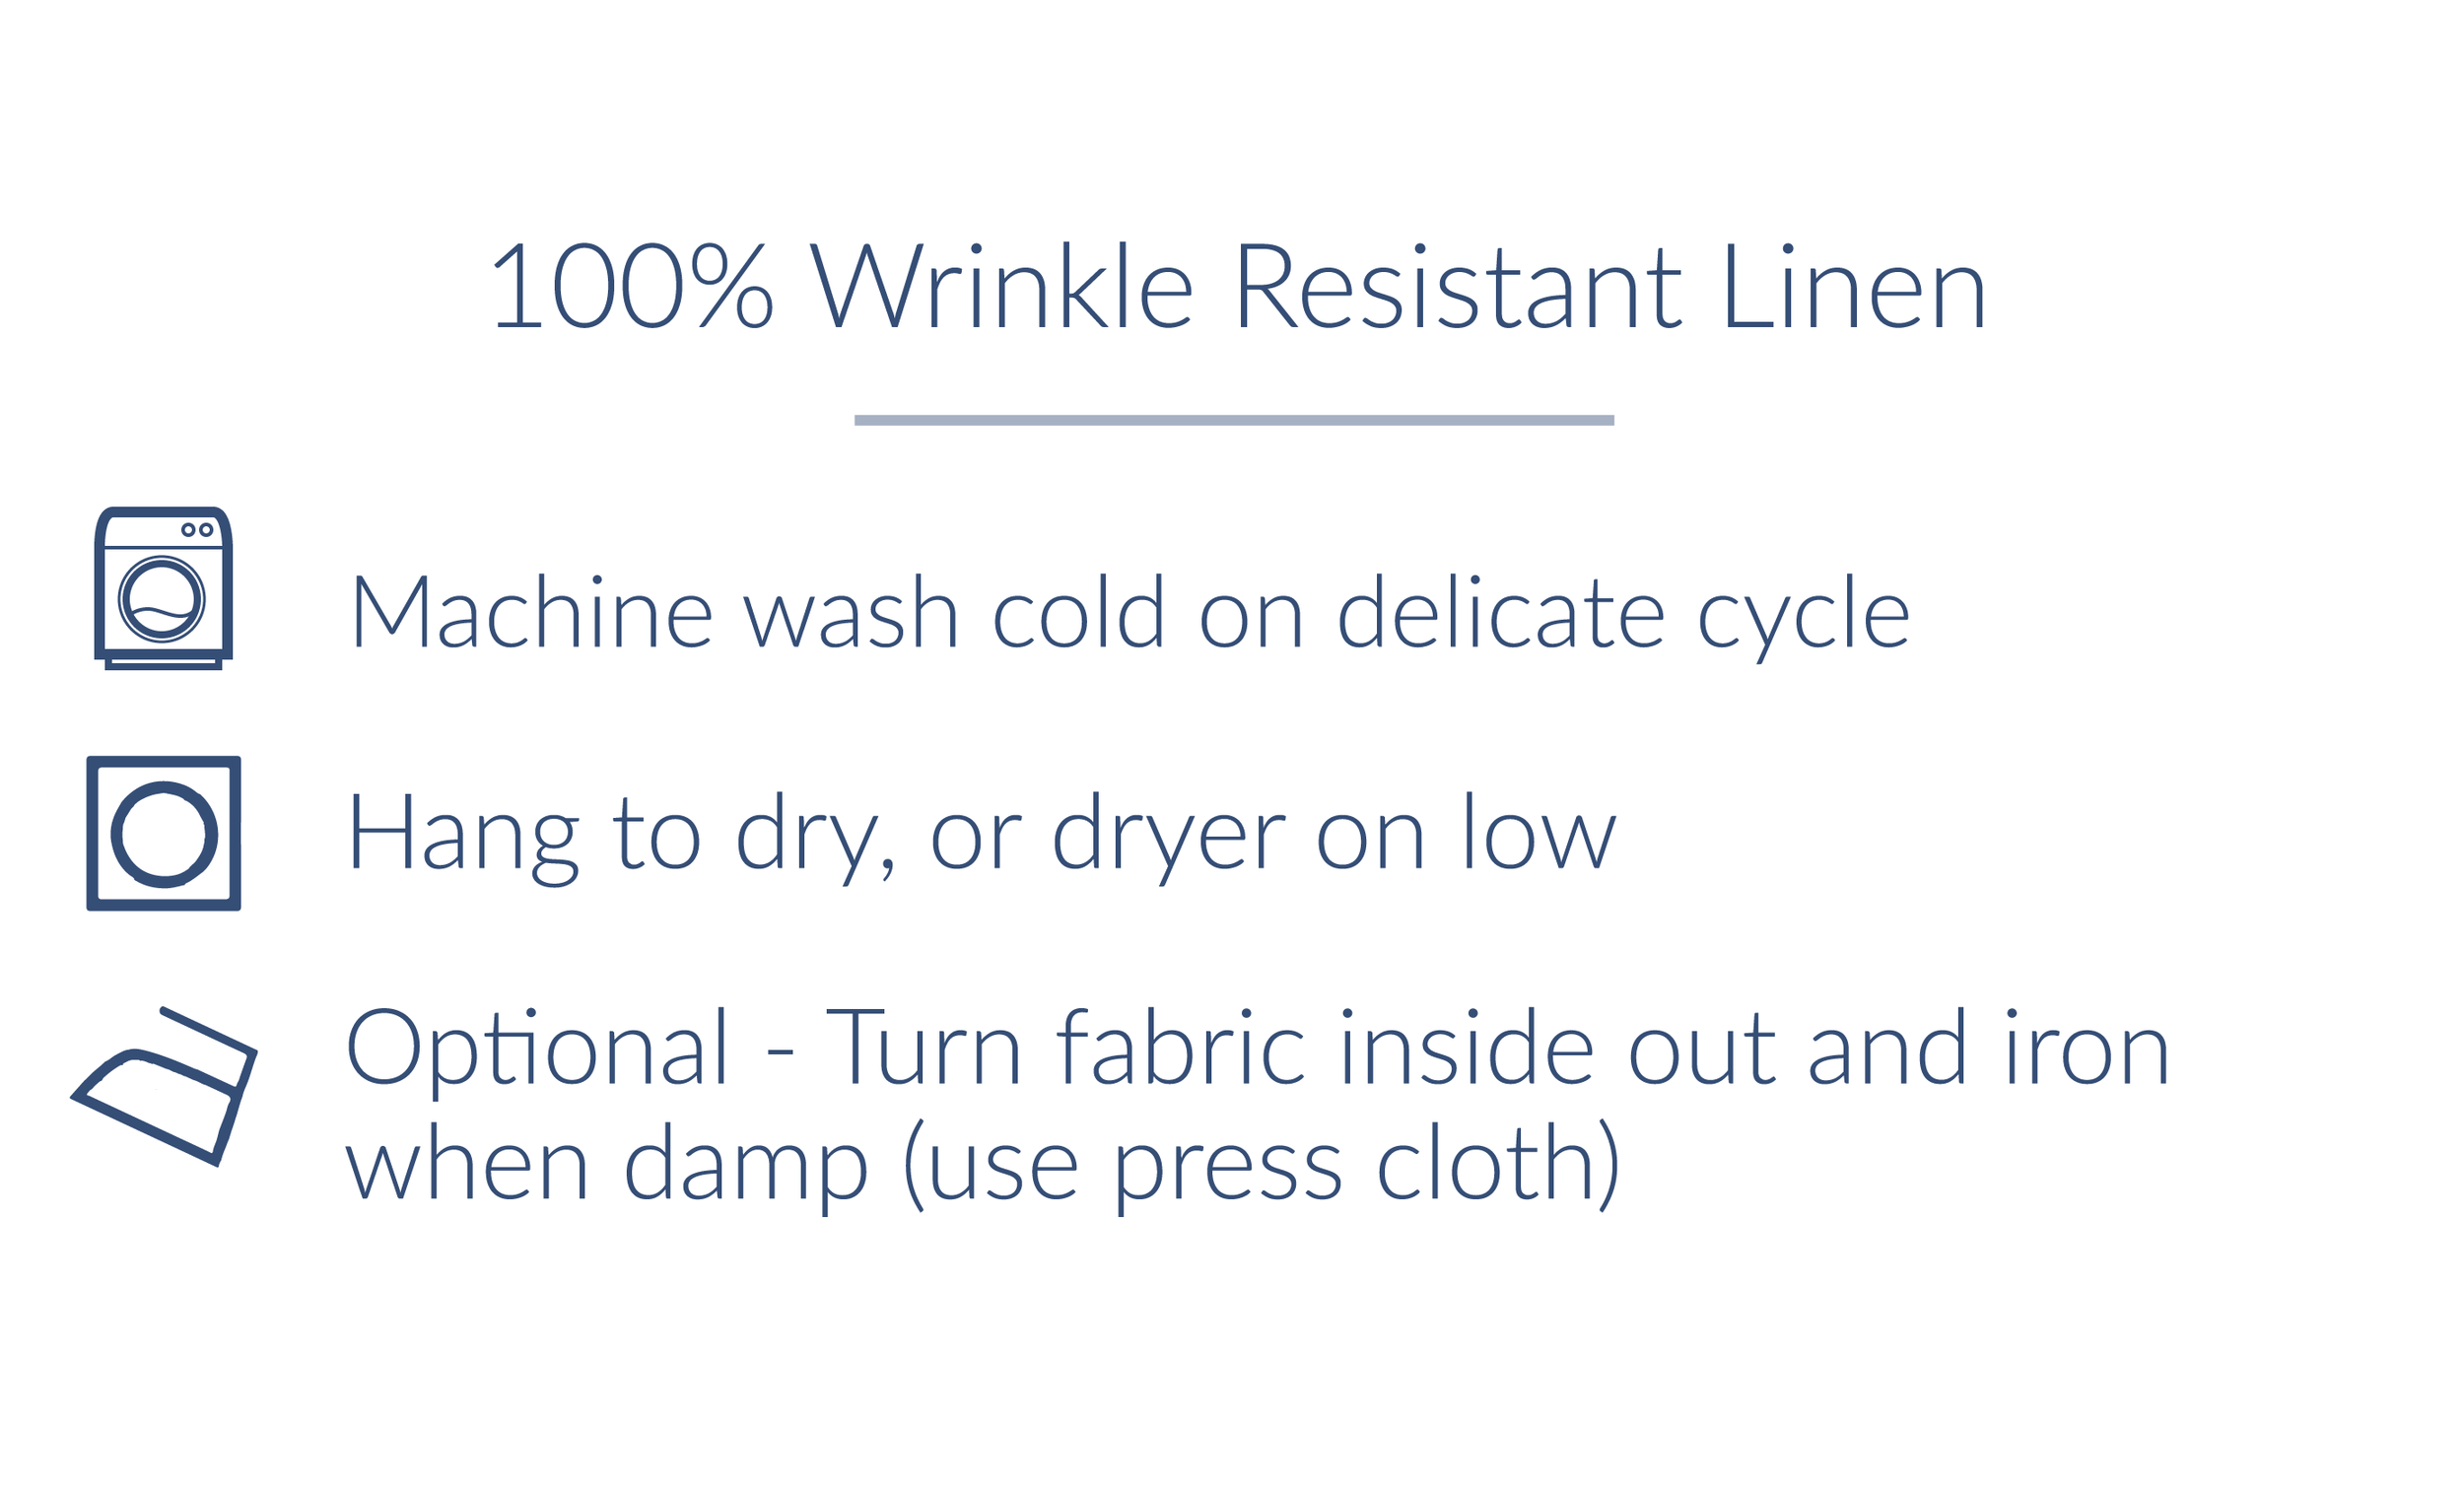 Product Care — Fridaze - The Original Wrinkle-Resistant Linen Collection